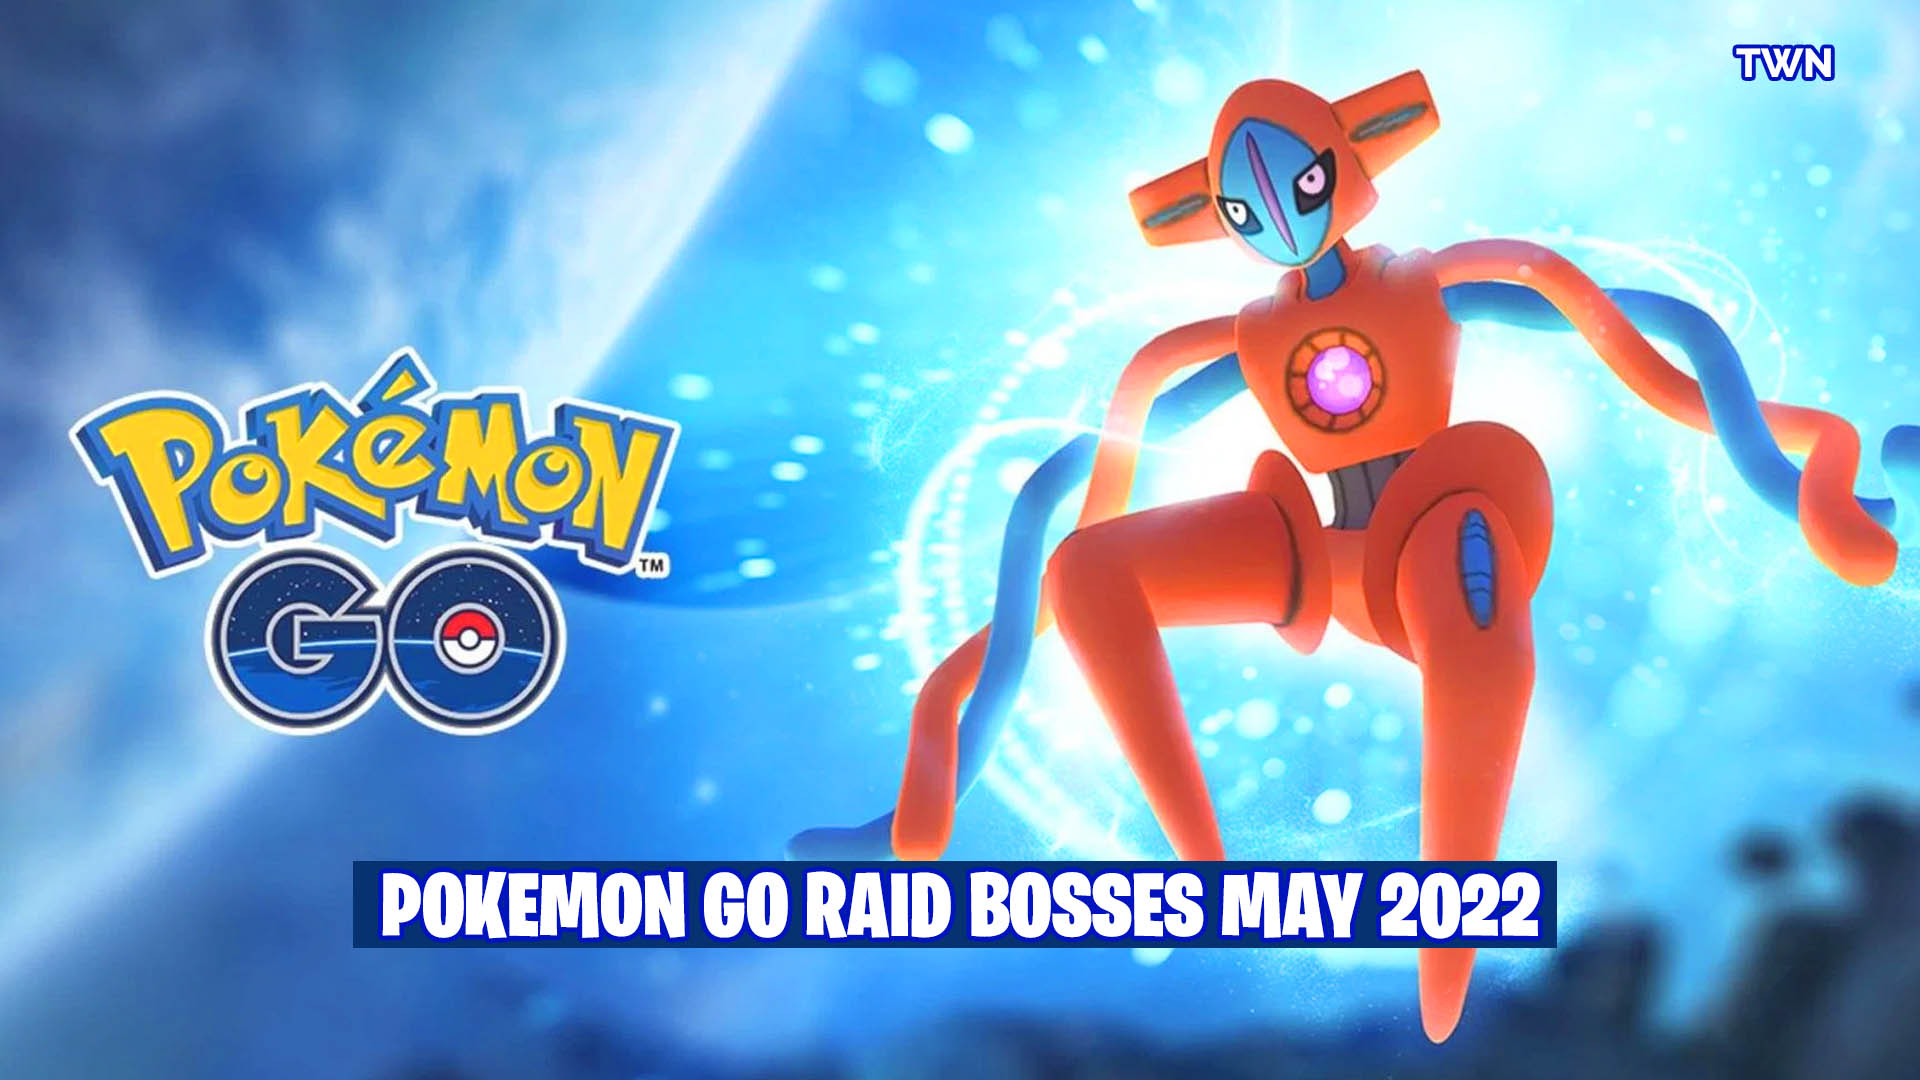 Current Raid Bosses - From Tuesday, May 10, 2022, at 10:00 a.m.